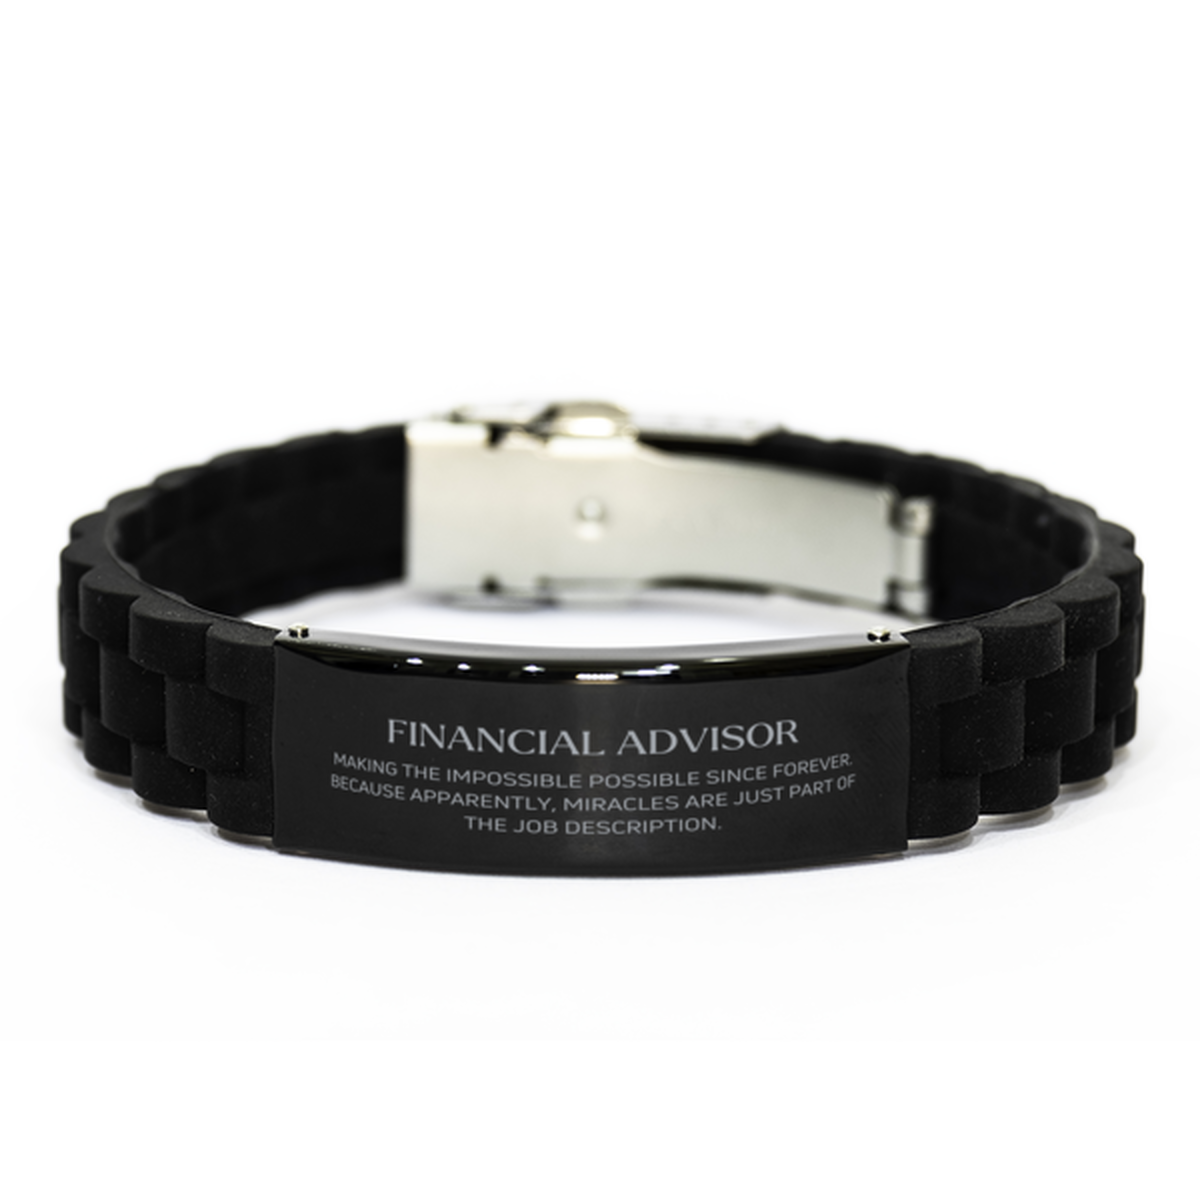 Funny Financial Advisor Gifts, Miracles are just part of the job description, Inspirational Birthday Black Glidelock Clasp Bracelet For Financial Advisor, Men, Women, Coworkers, Friends, Boss